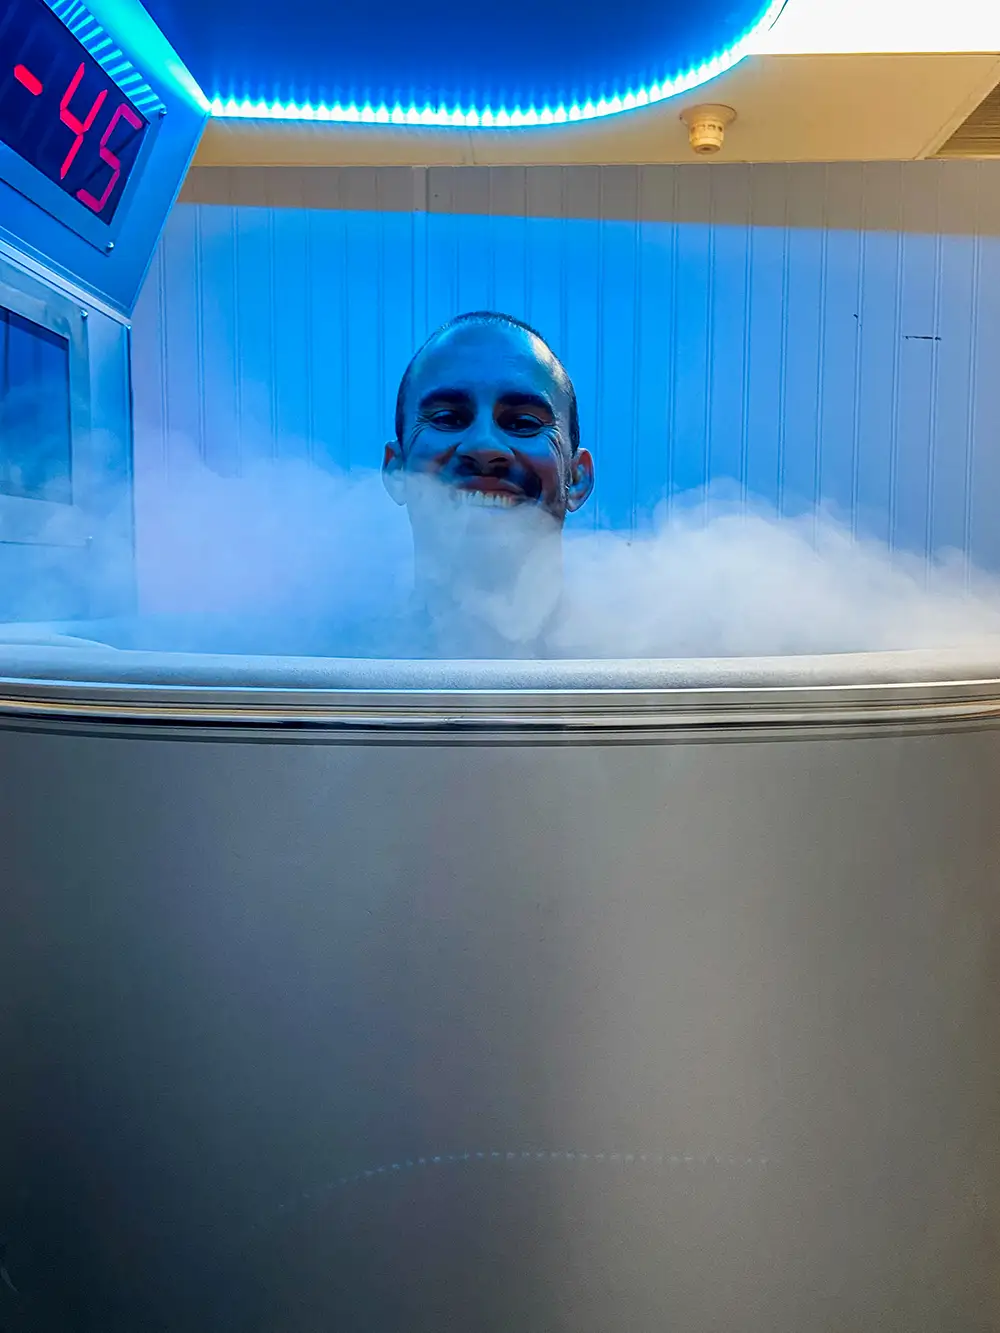 An image of a customer using the cryotherapy machine next to a description of what cryotherapy is at Raposo BJJ Academy in Slidell LA